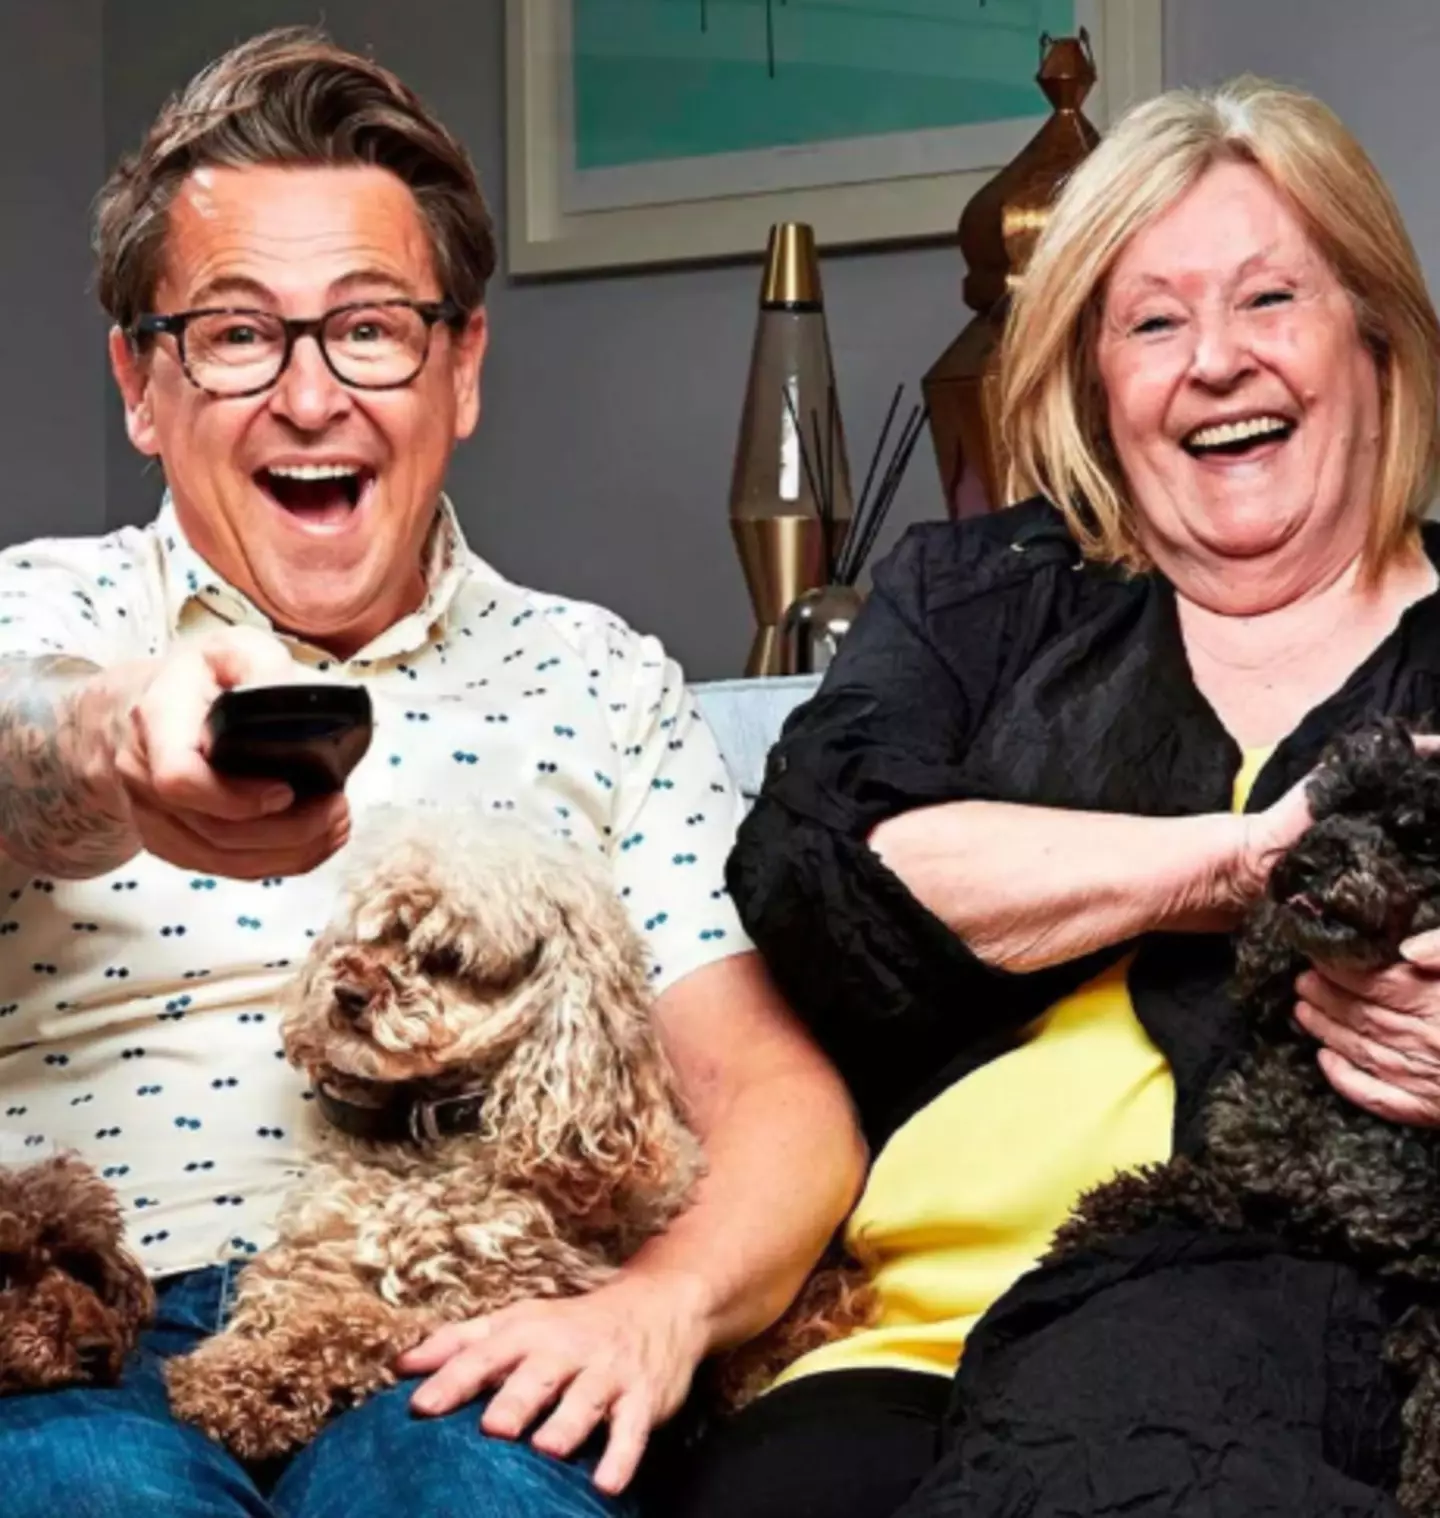 Channel 4 announced the sad news that Gogglebox star Pat Webb sadly died aged 75 after suffering with a ‘long illness’.